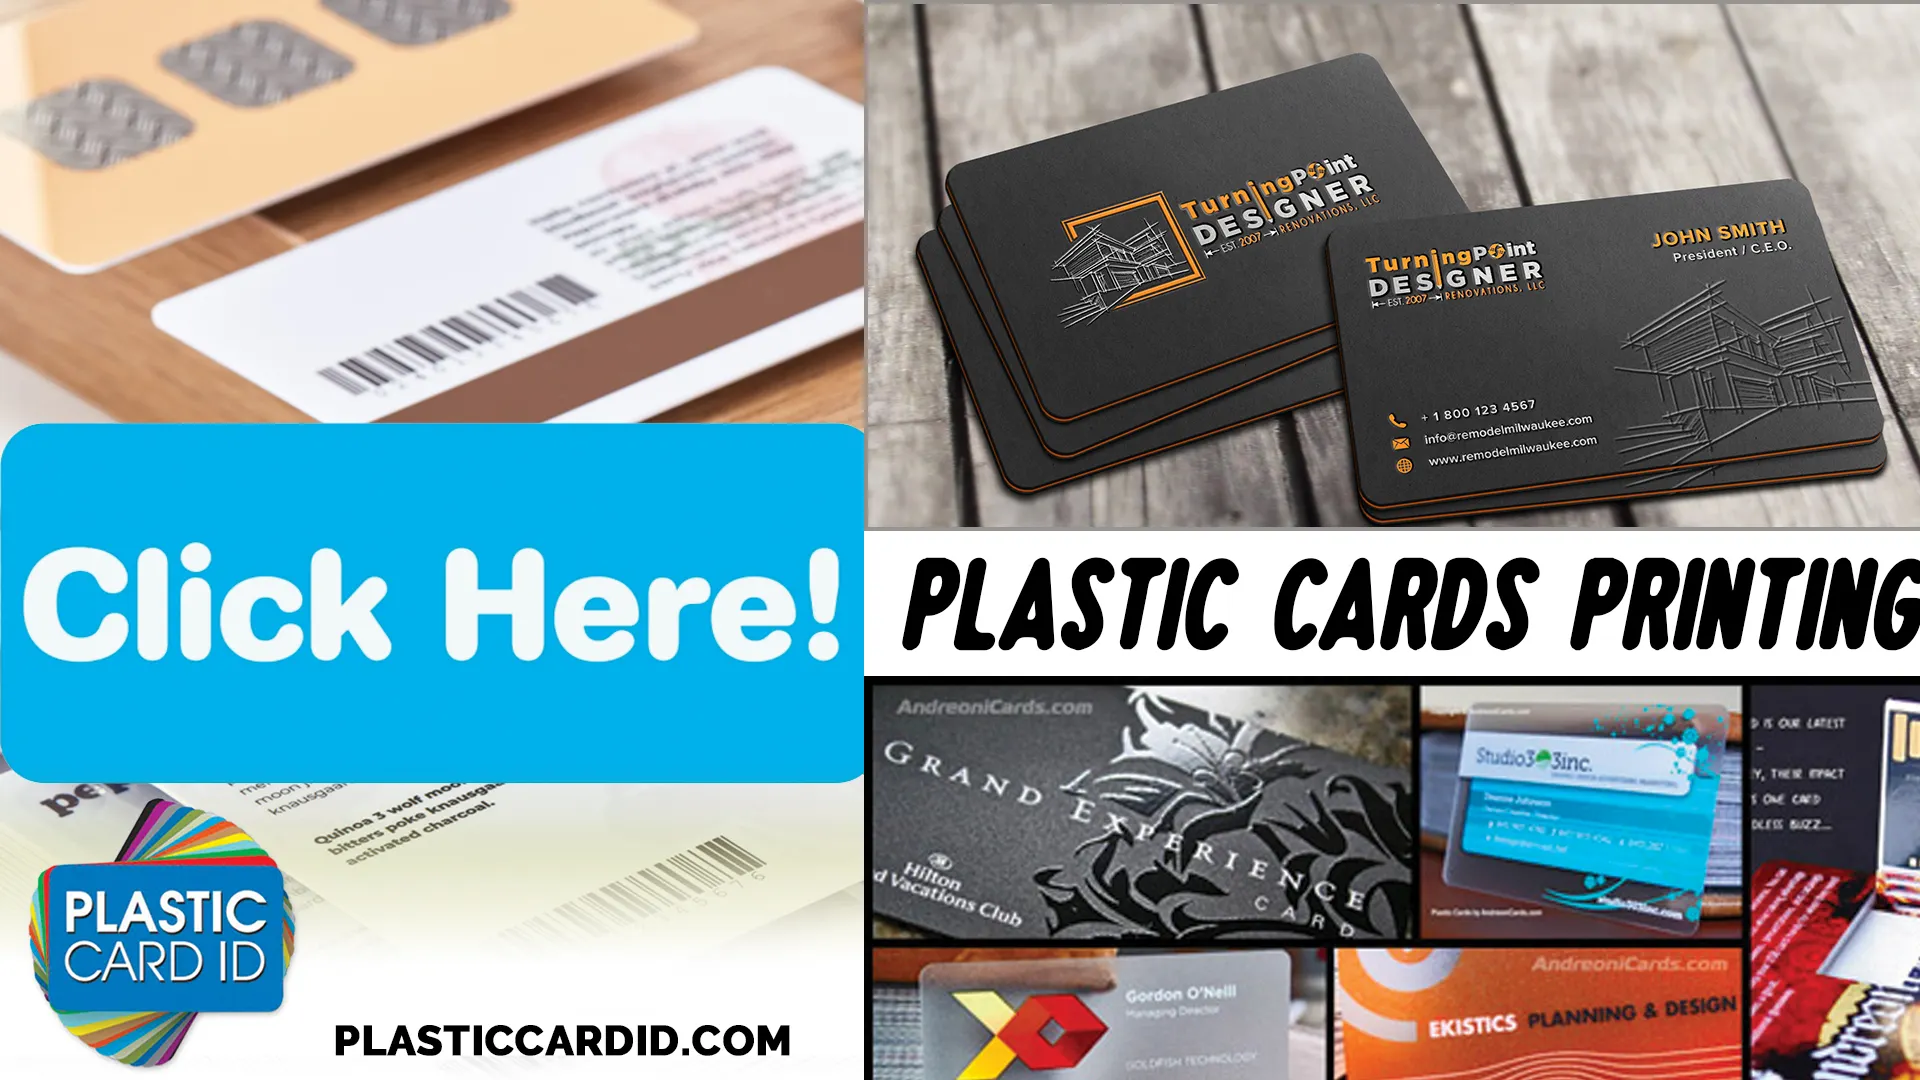 Your One-Stop-Shop for Card Printing Solutions Nationwide